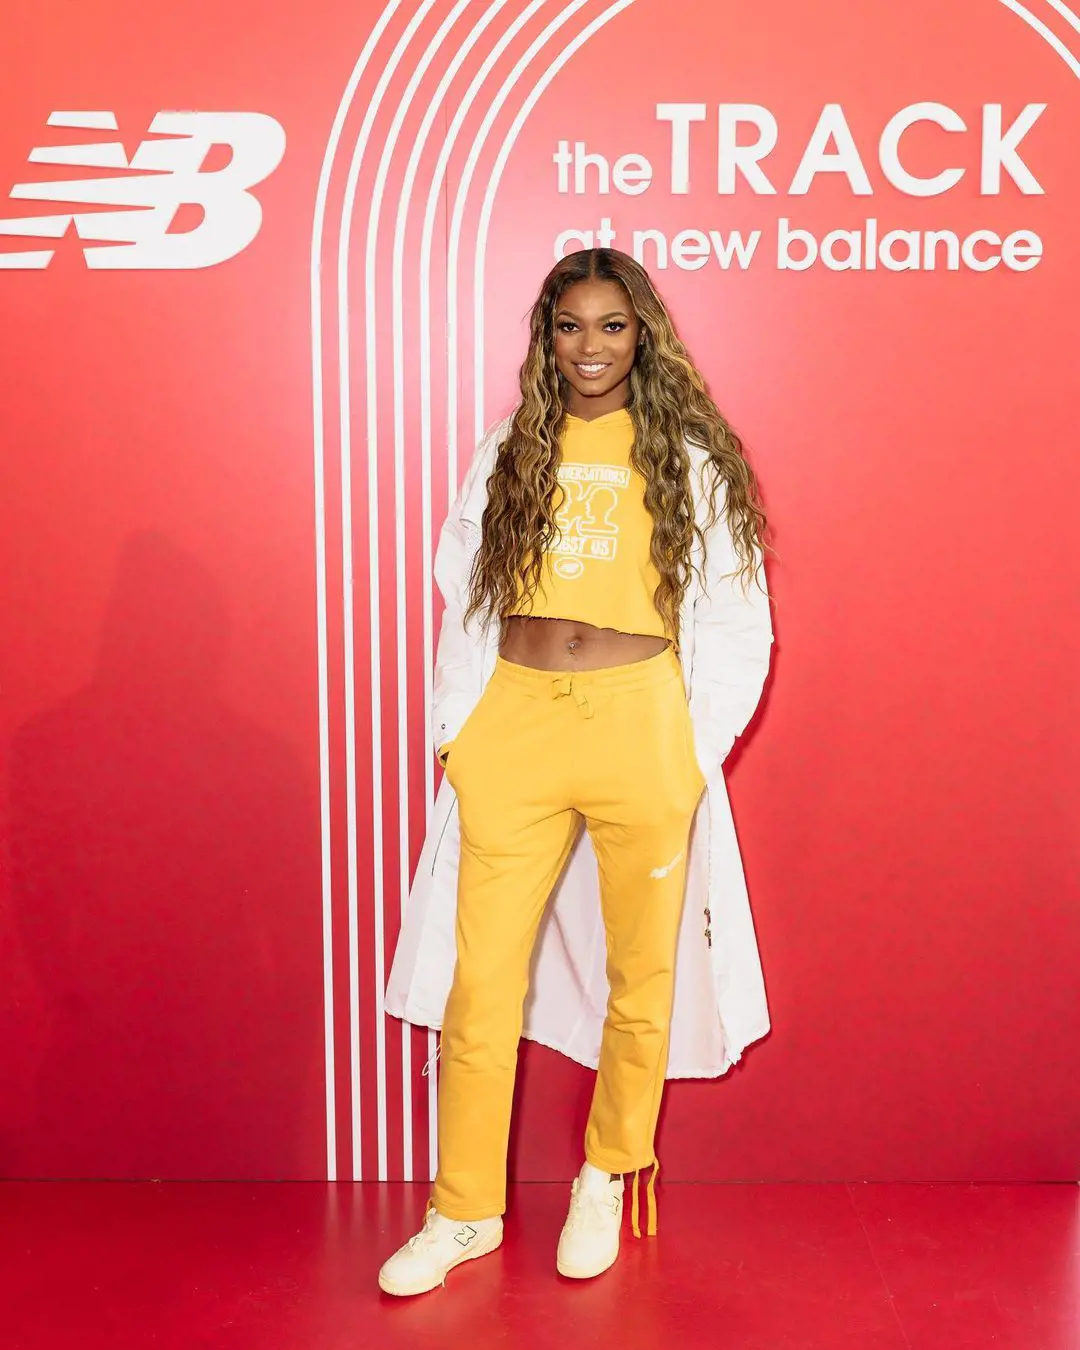 Gabrielle celebrated the launch of the the track at new balance at Boston, Massachusetts on April 15, 2022.